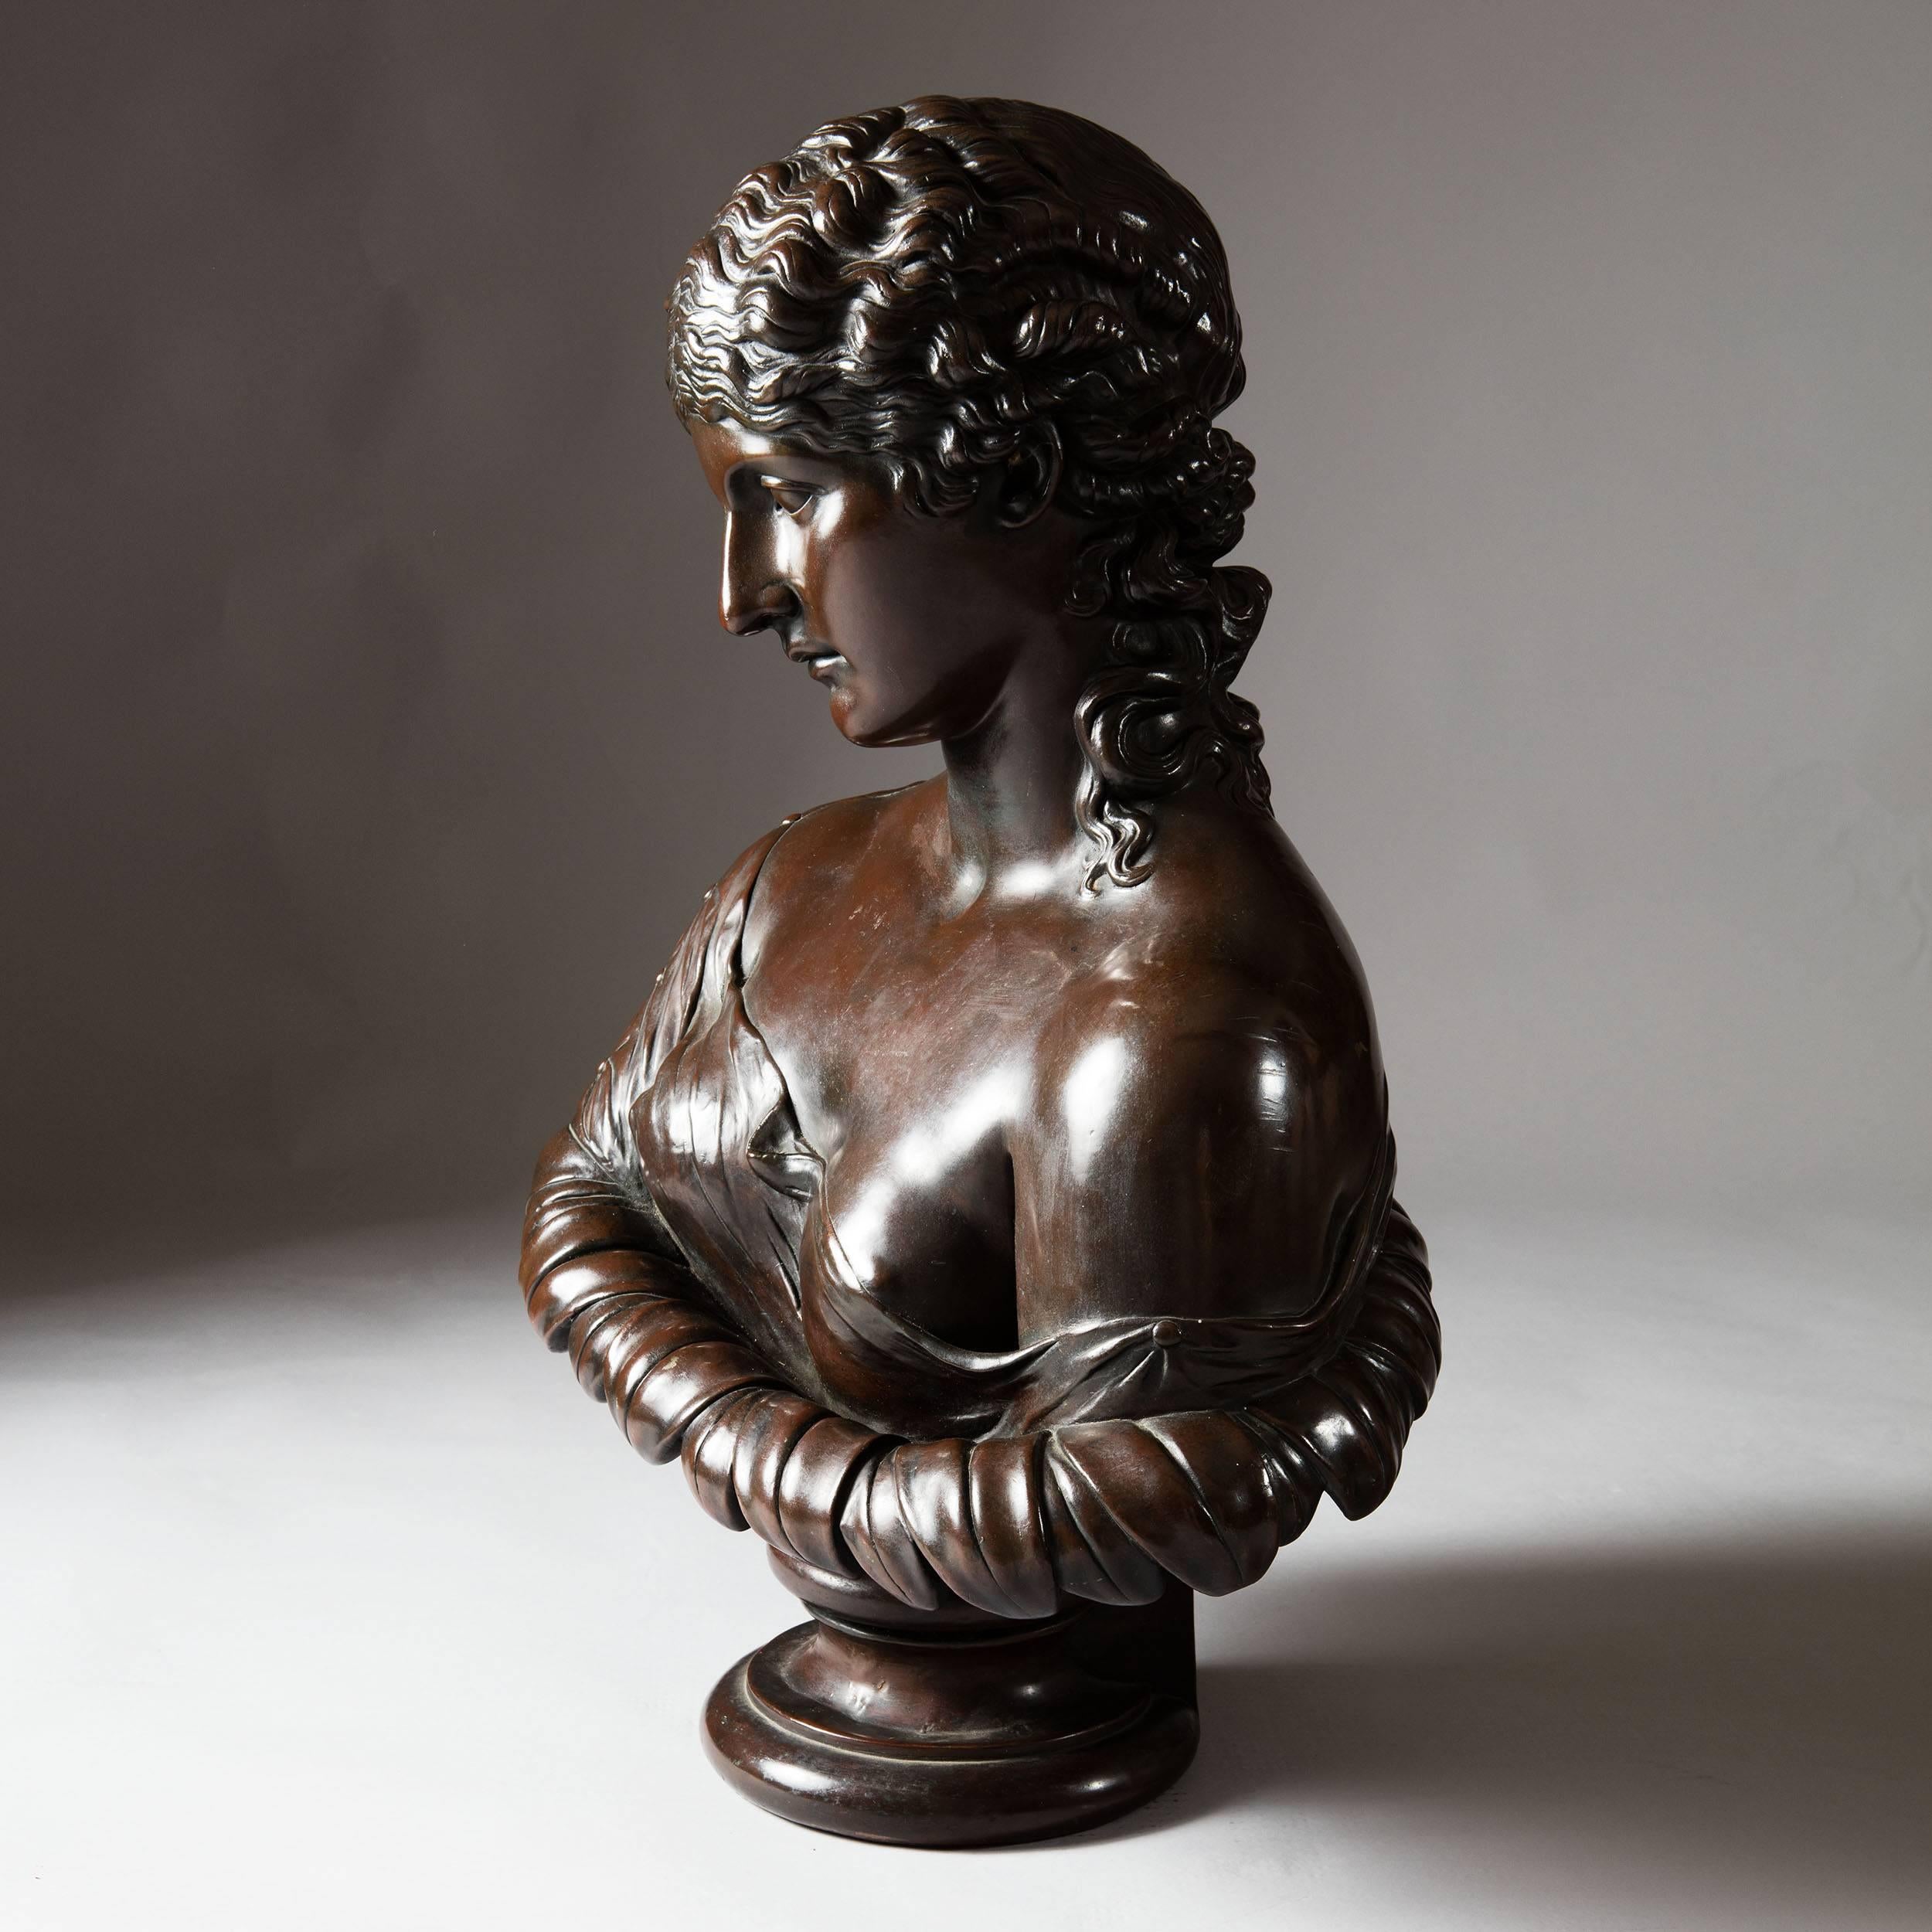 Northern Europe, 19th Century. 

A large electrotype patinated bronze on copper sculptural bust of Clytie raised on integral socle.

Measures: Height 29 inches. 

Clytie was a name given to a number of figures in Greek mythology. However, the